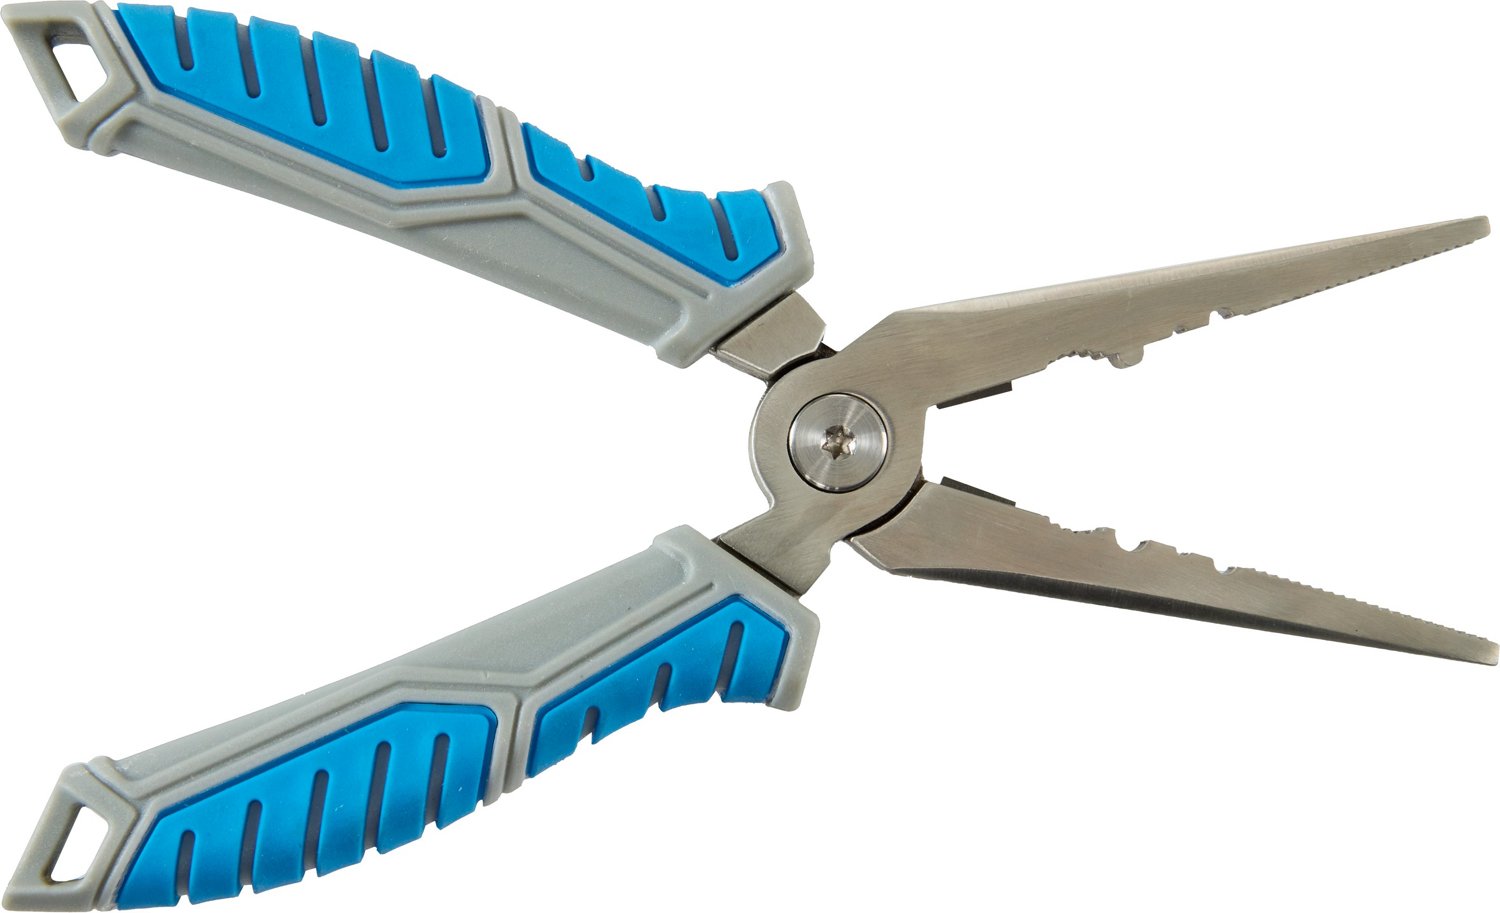 SXP Fishing Pliers for Saltwater and Freshwater